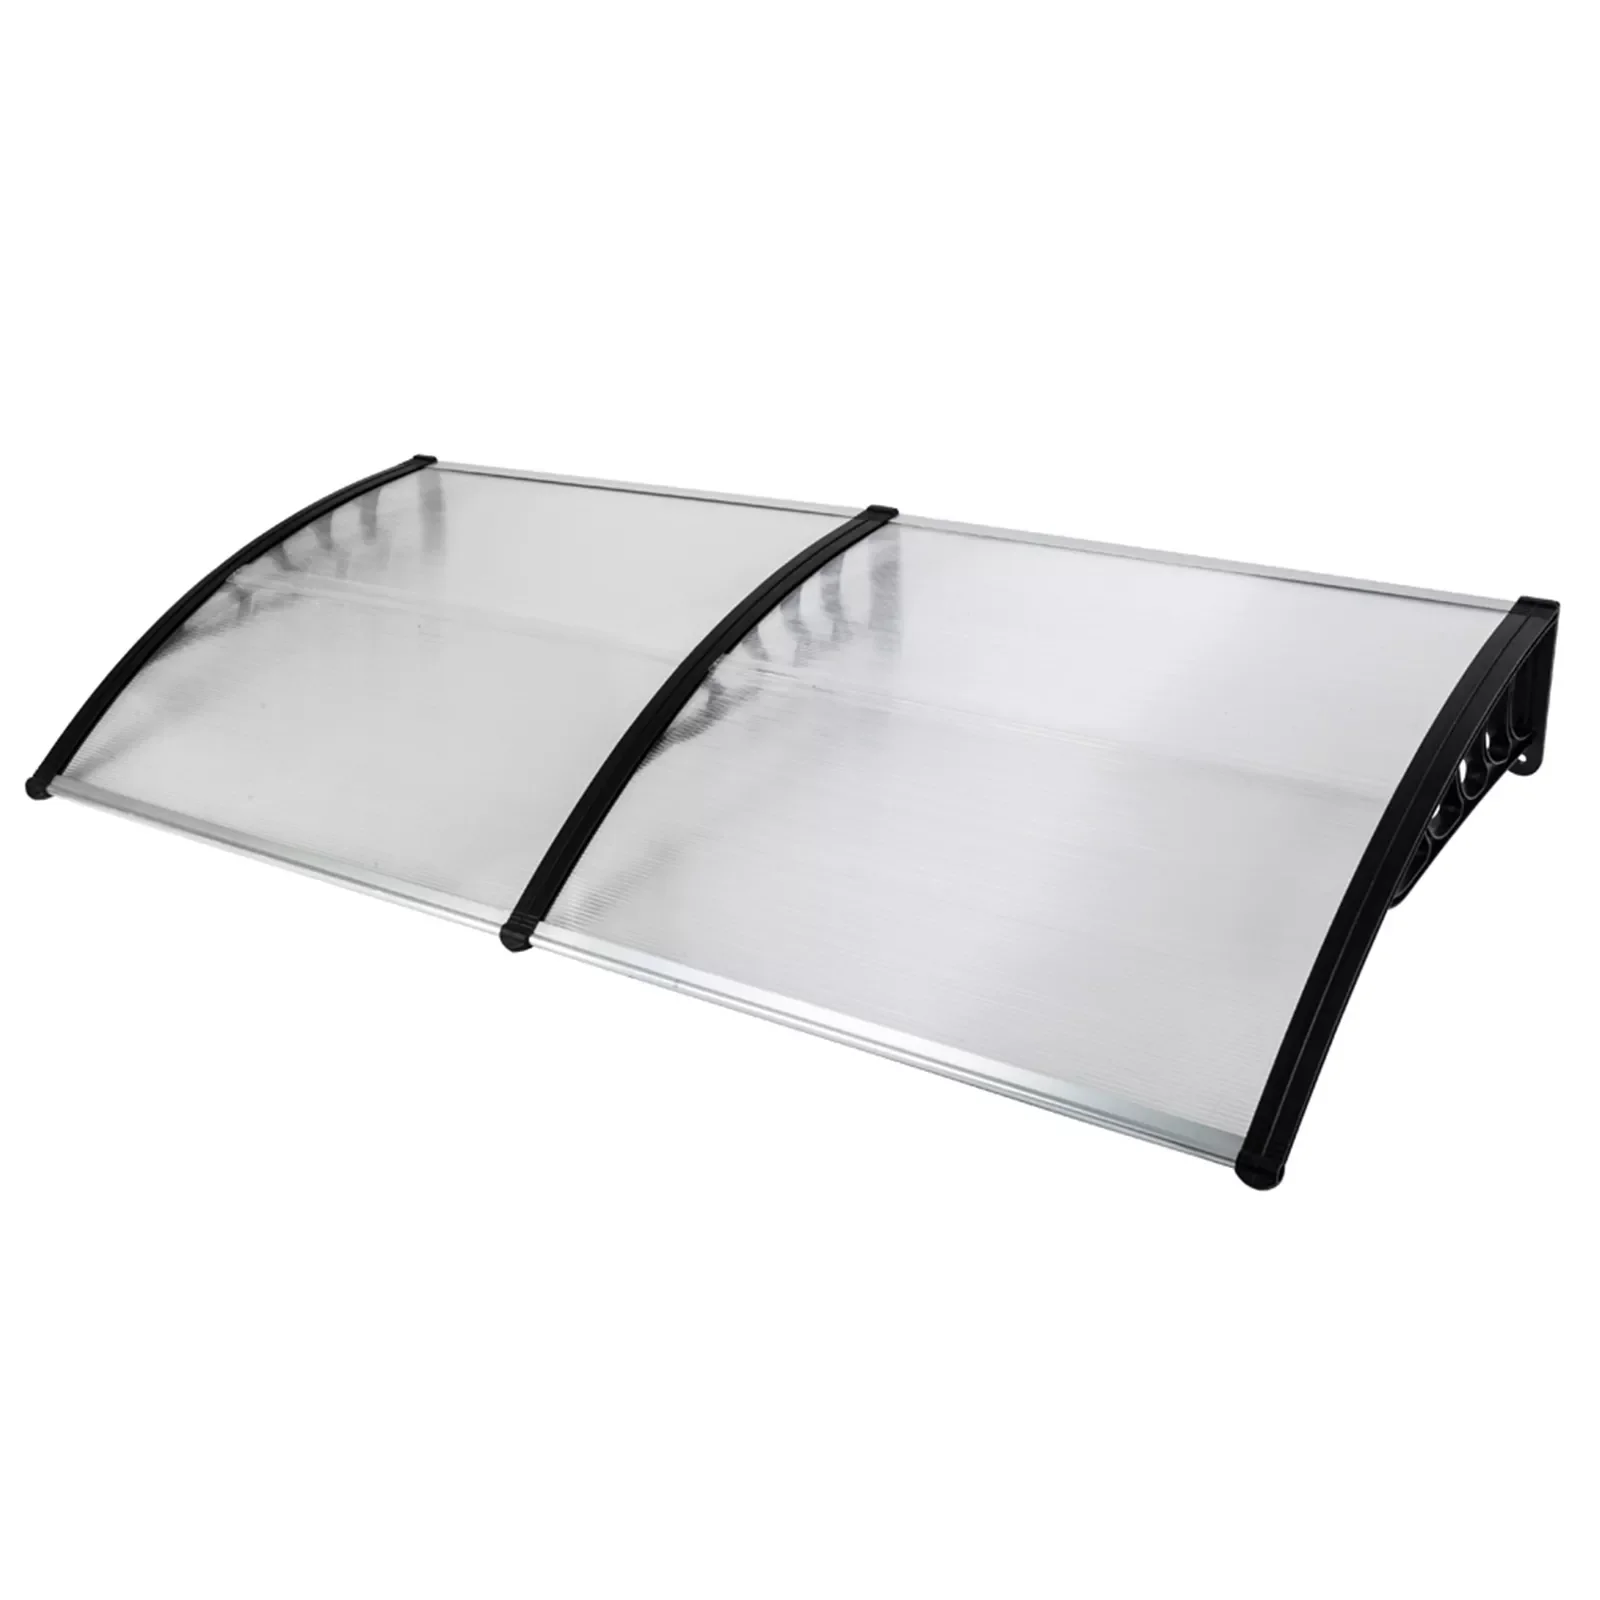 

NEW2023 1PC Awning Door Window Rain Cover Window Eaves Front Door Outdoor Patio Canopy Sun Shelter for Household Application